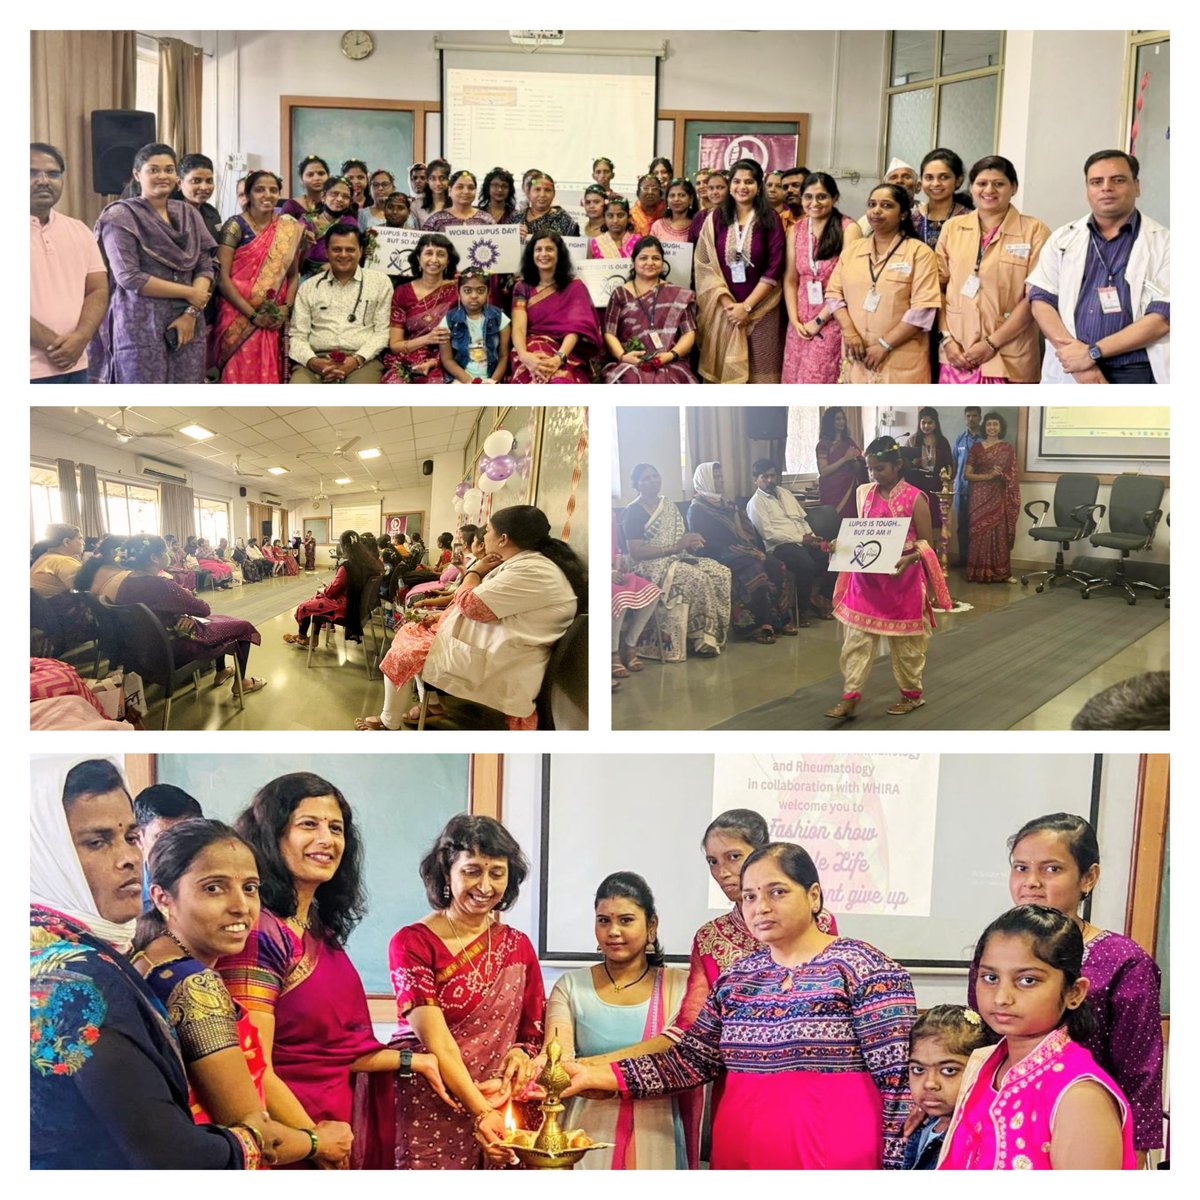 Lupus Awareness program, BVP, Pune. Fashion show - pretty girls in 🩷 and 💜 stole our hearts; a talk on Diet in Lupus. Their stories, left us teary eyed, yet with hope and self motivation. You all are fighters. Stay strong!
#LupusAwarenessMonth #Rheumtwitter